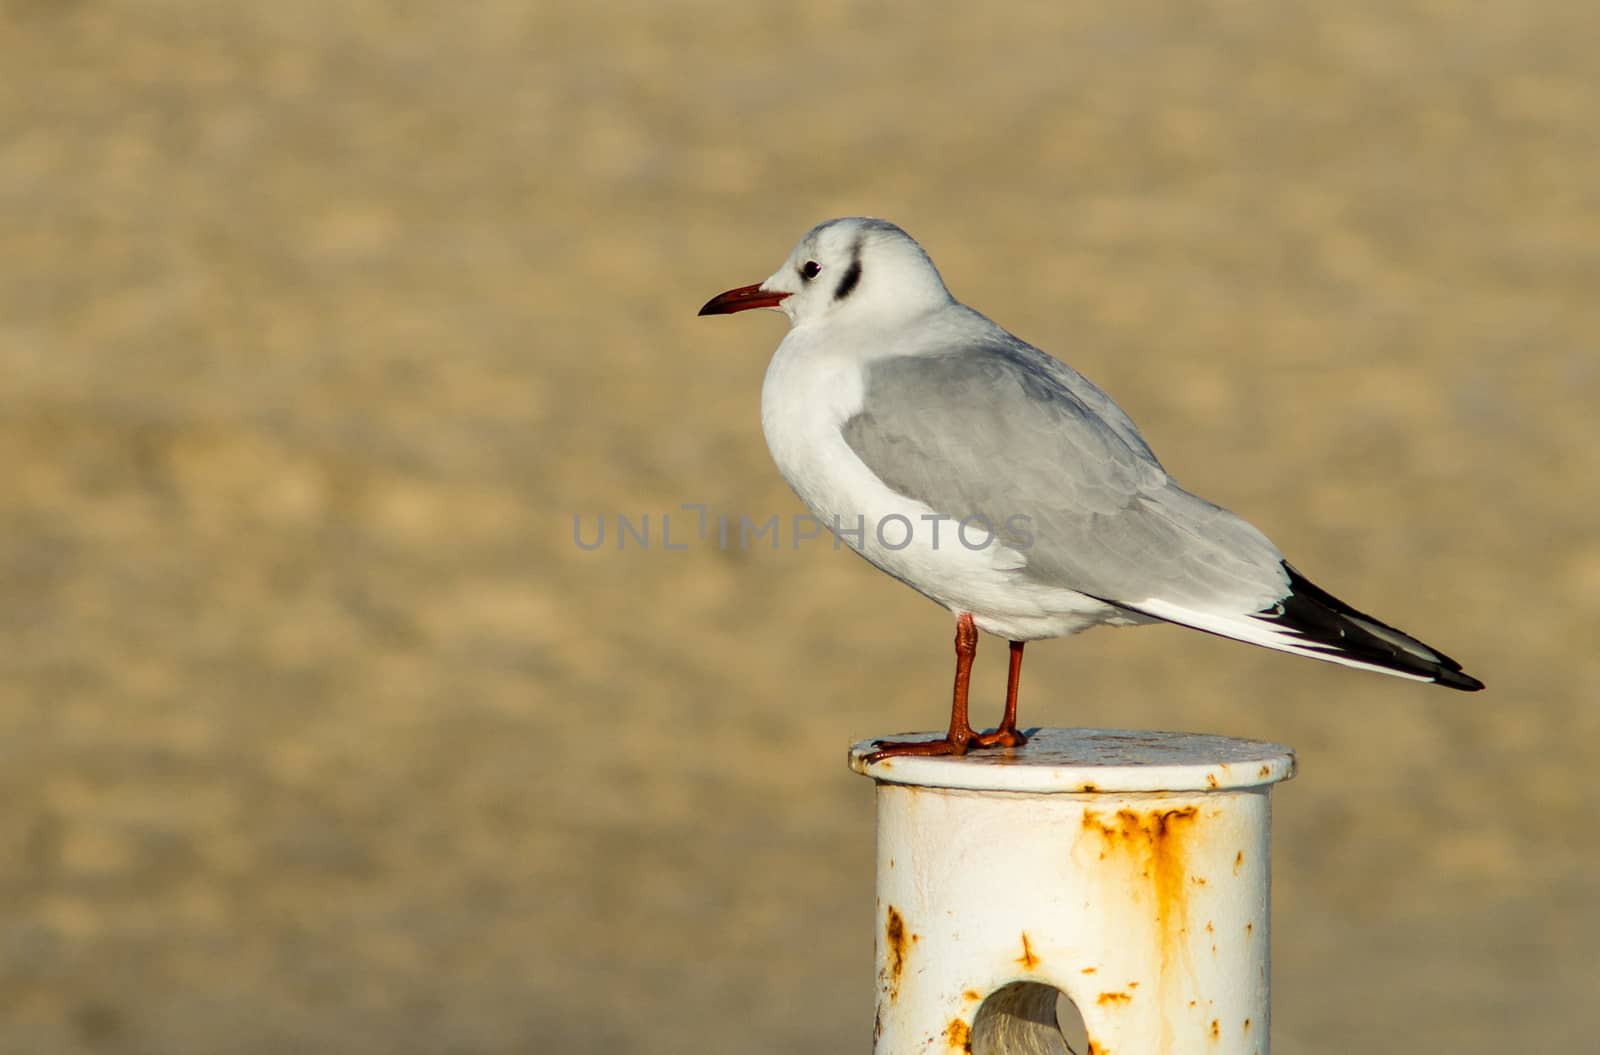 Seagull sitting on the rusty pole with yellow sand background